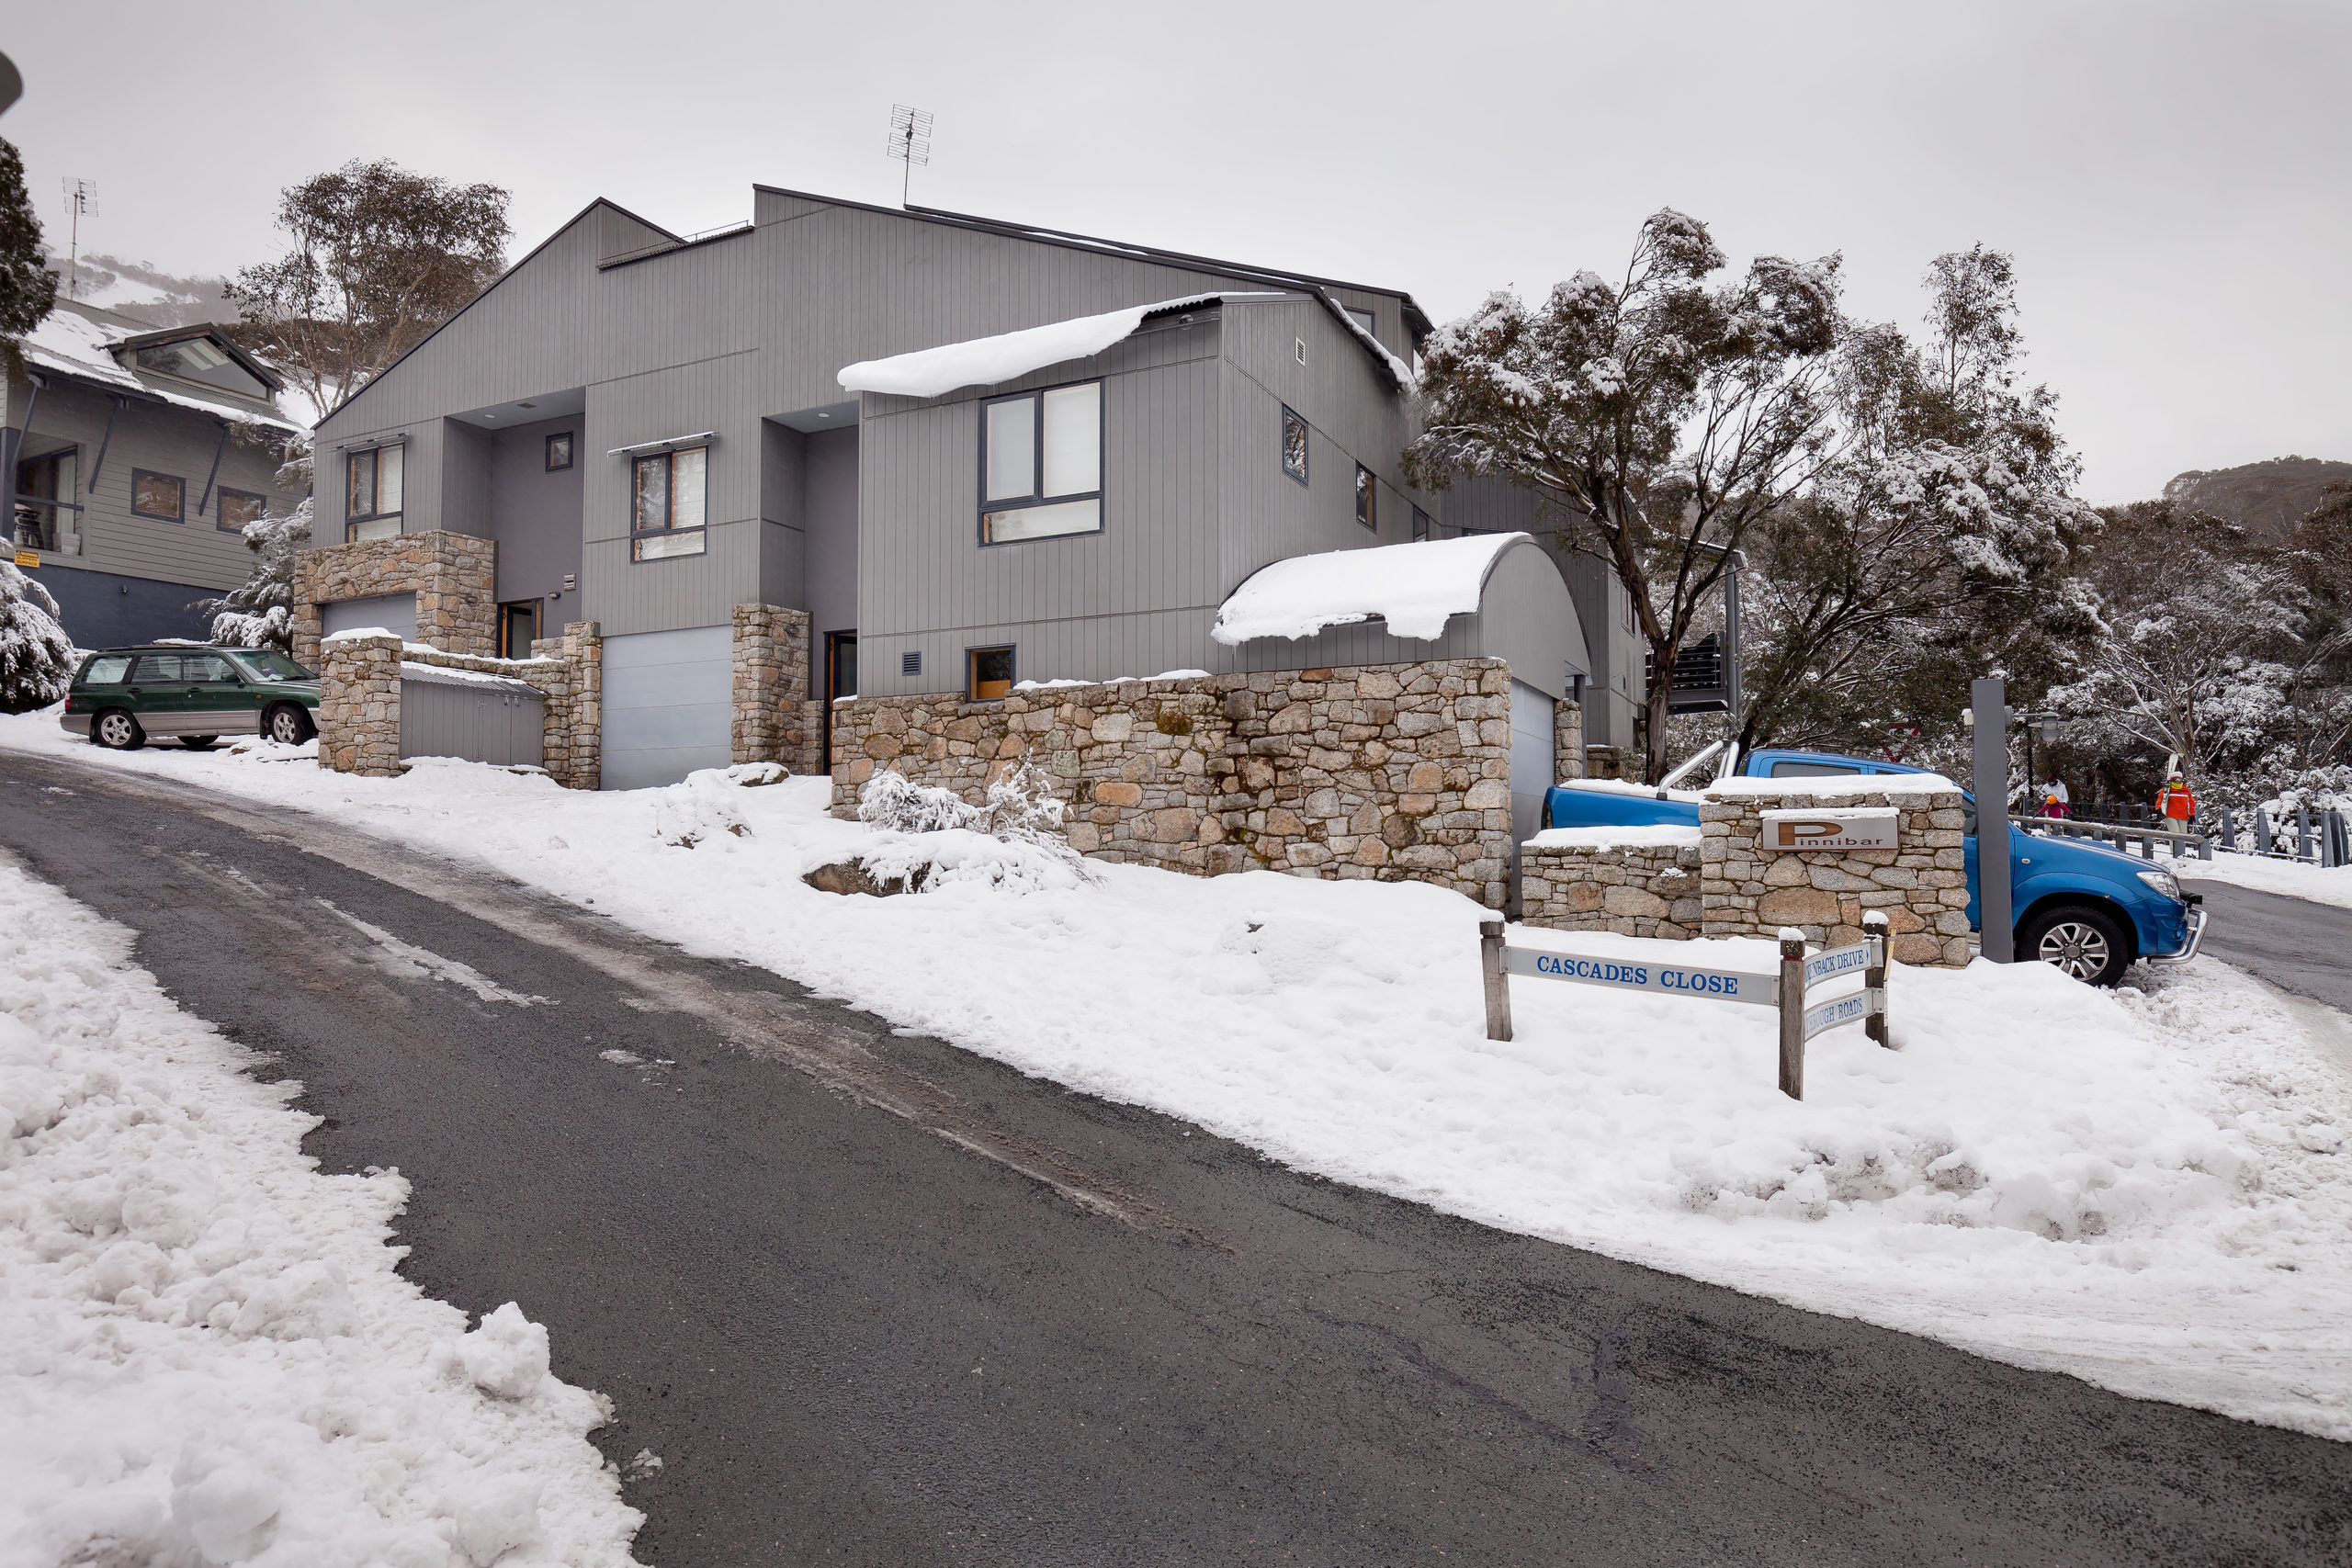 Thredbo, Large Two Bedroom and Loft Ski Chalet in Small Complex of Three Overlooking Ramshead Creek – Price: $1,900,000- $1,980,000